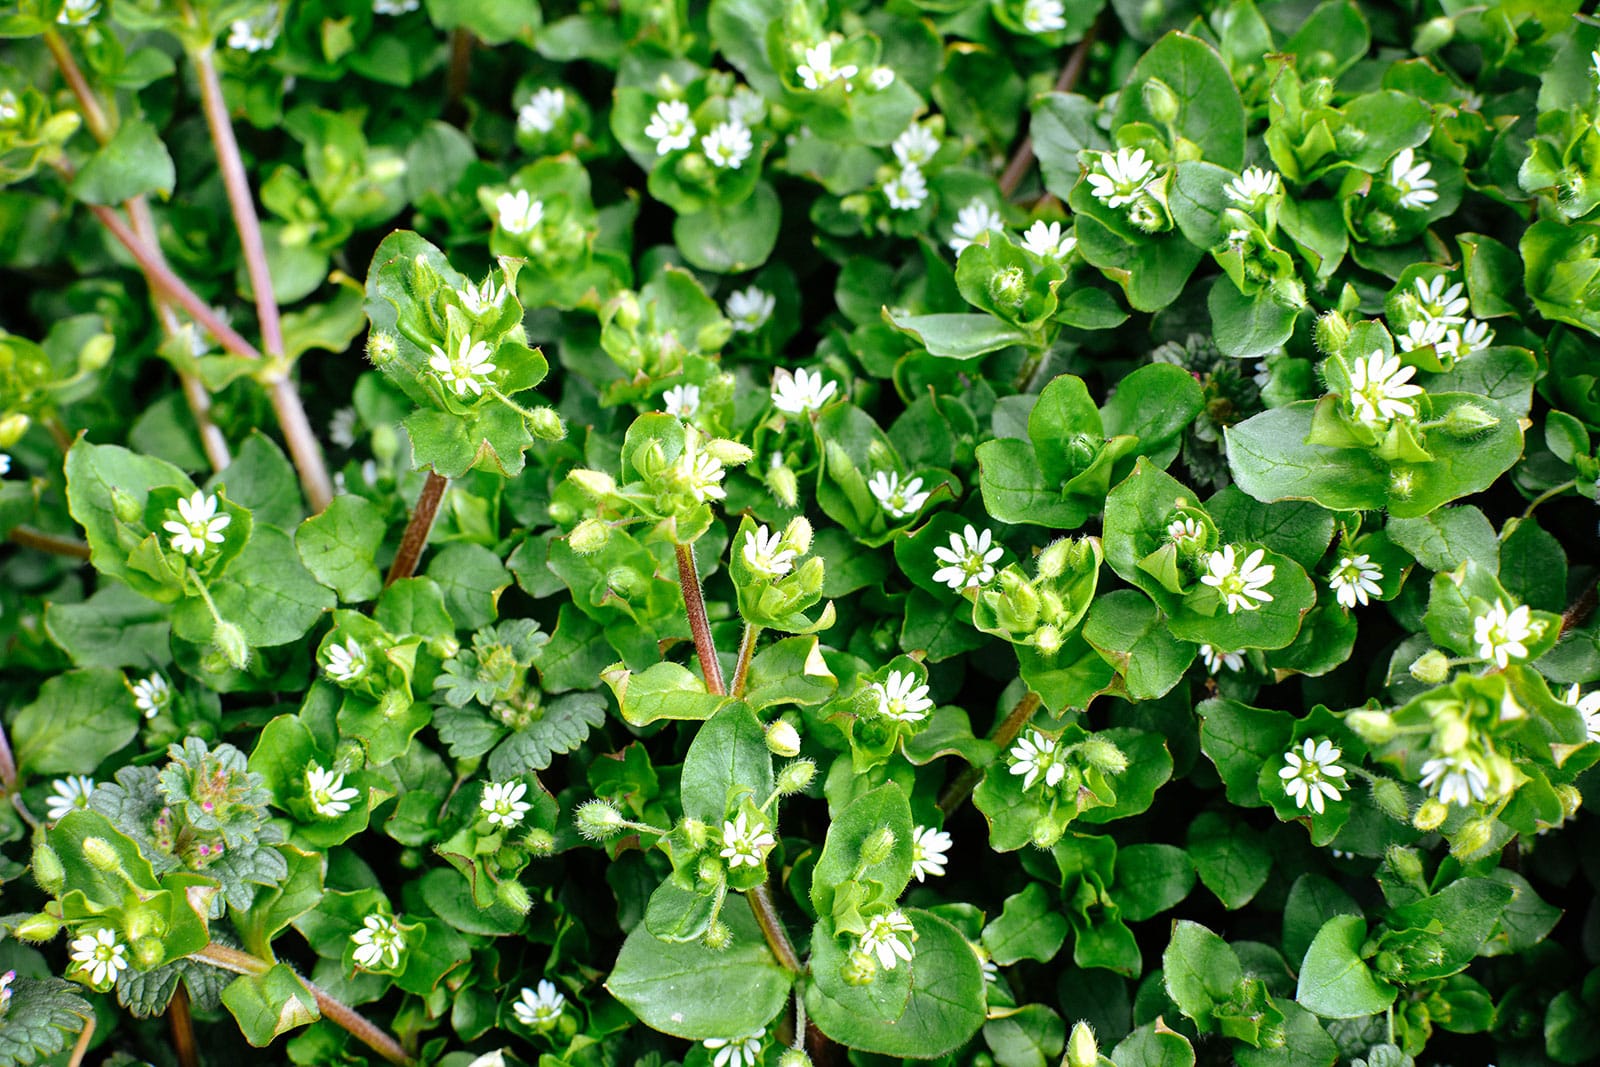 A dense mat of chickweed with tiny white flowers